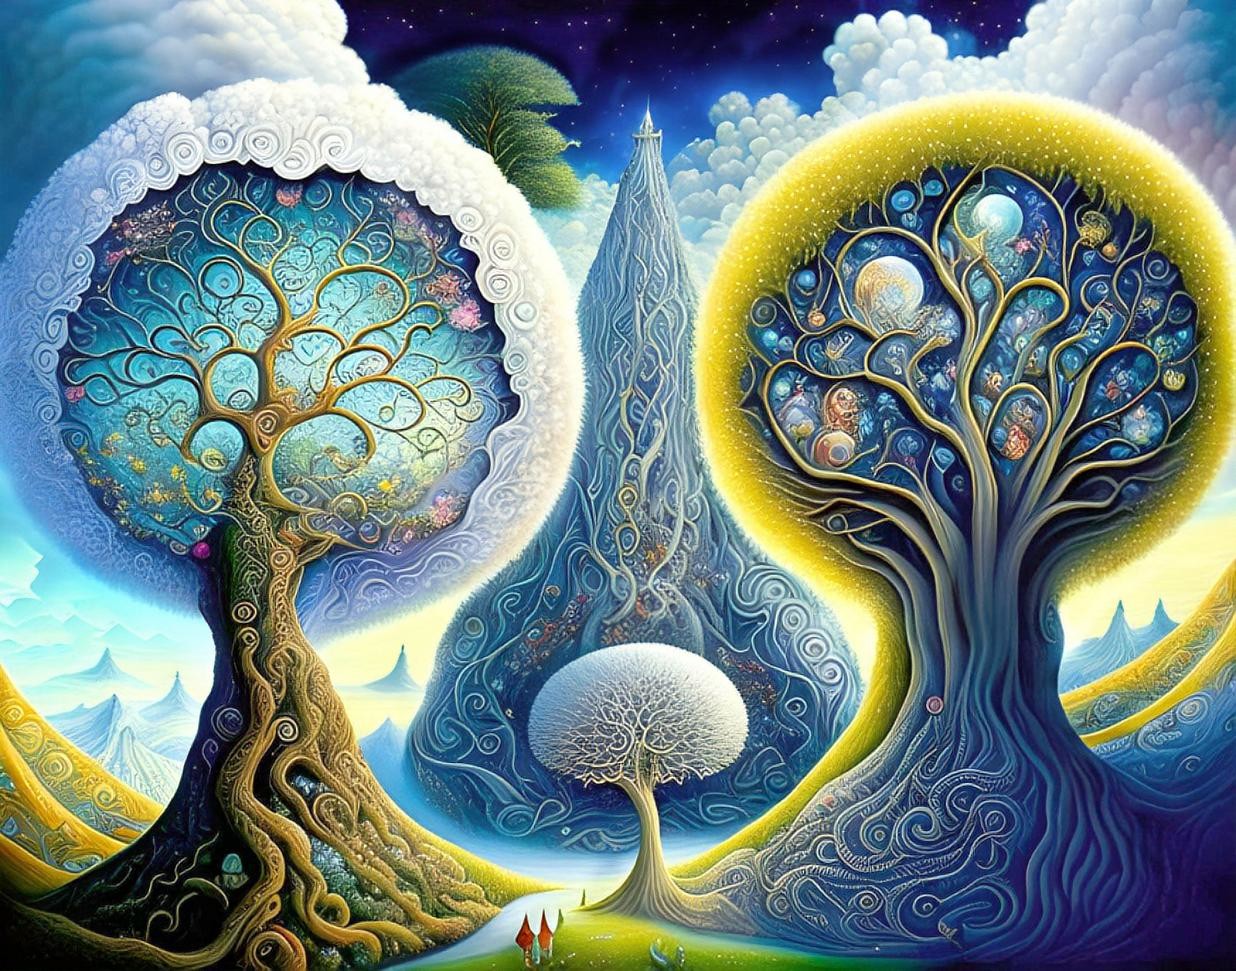 Trees of Life, Day and Night